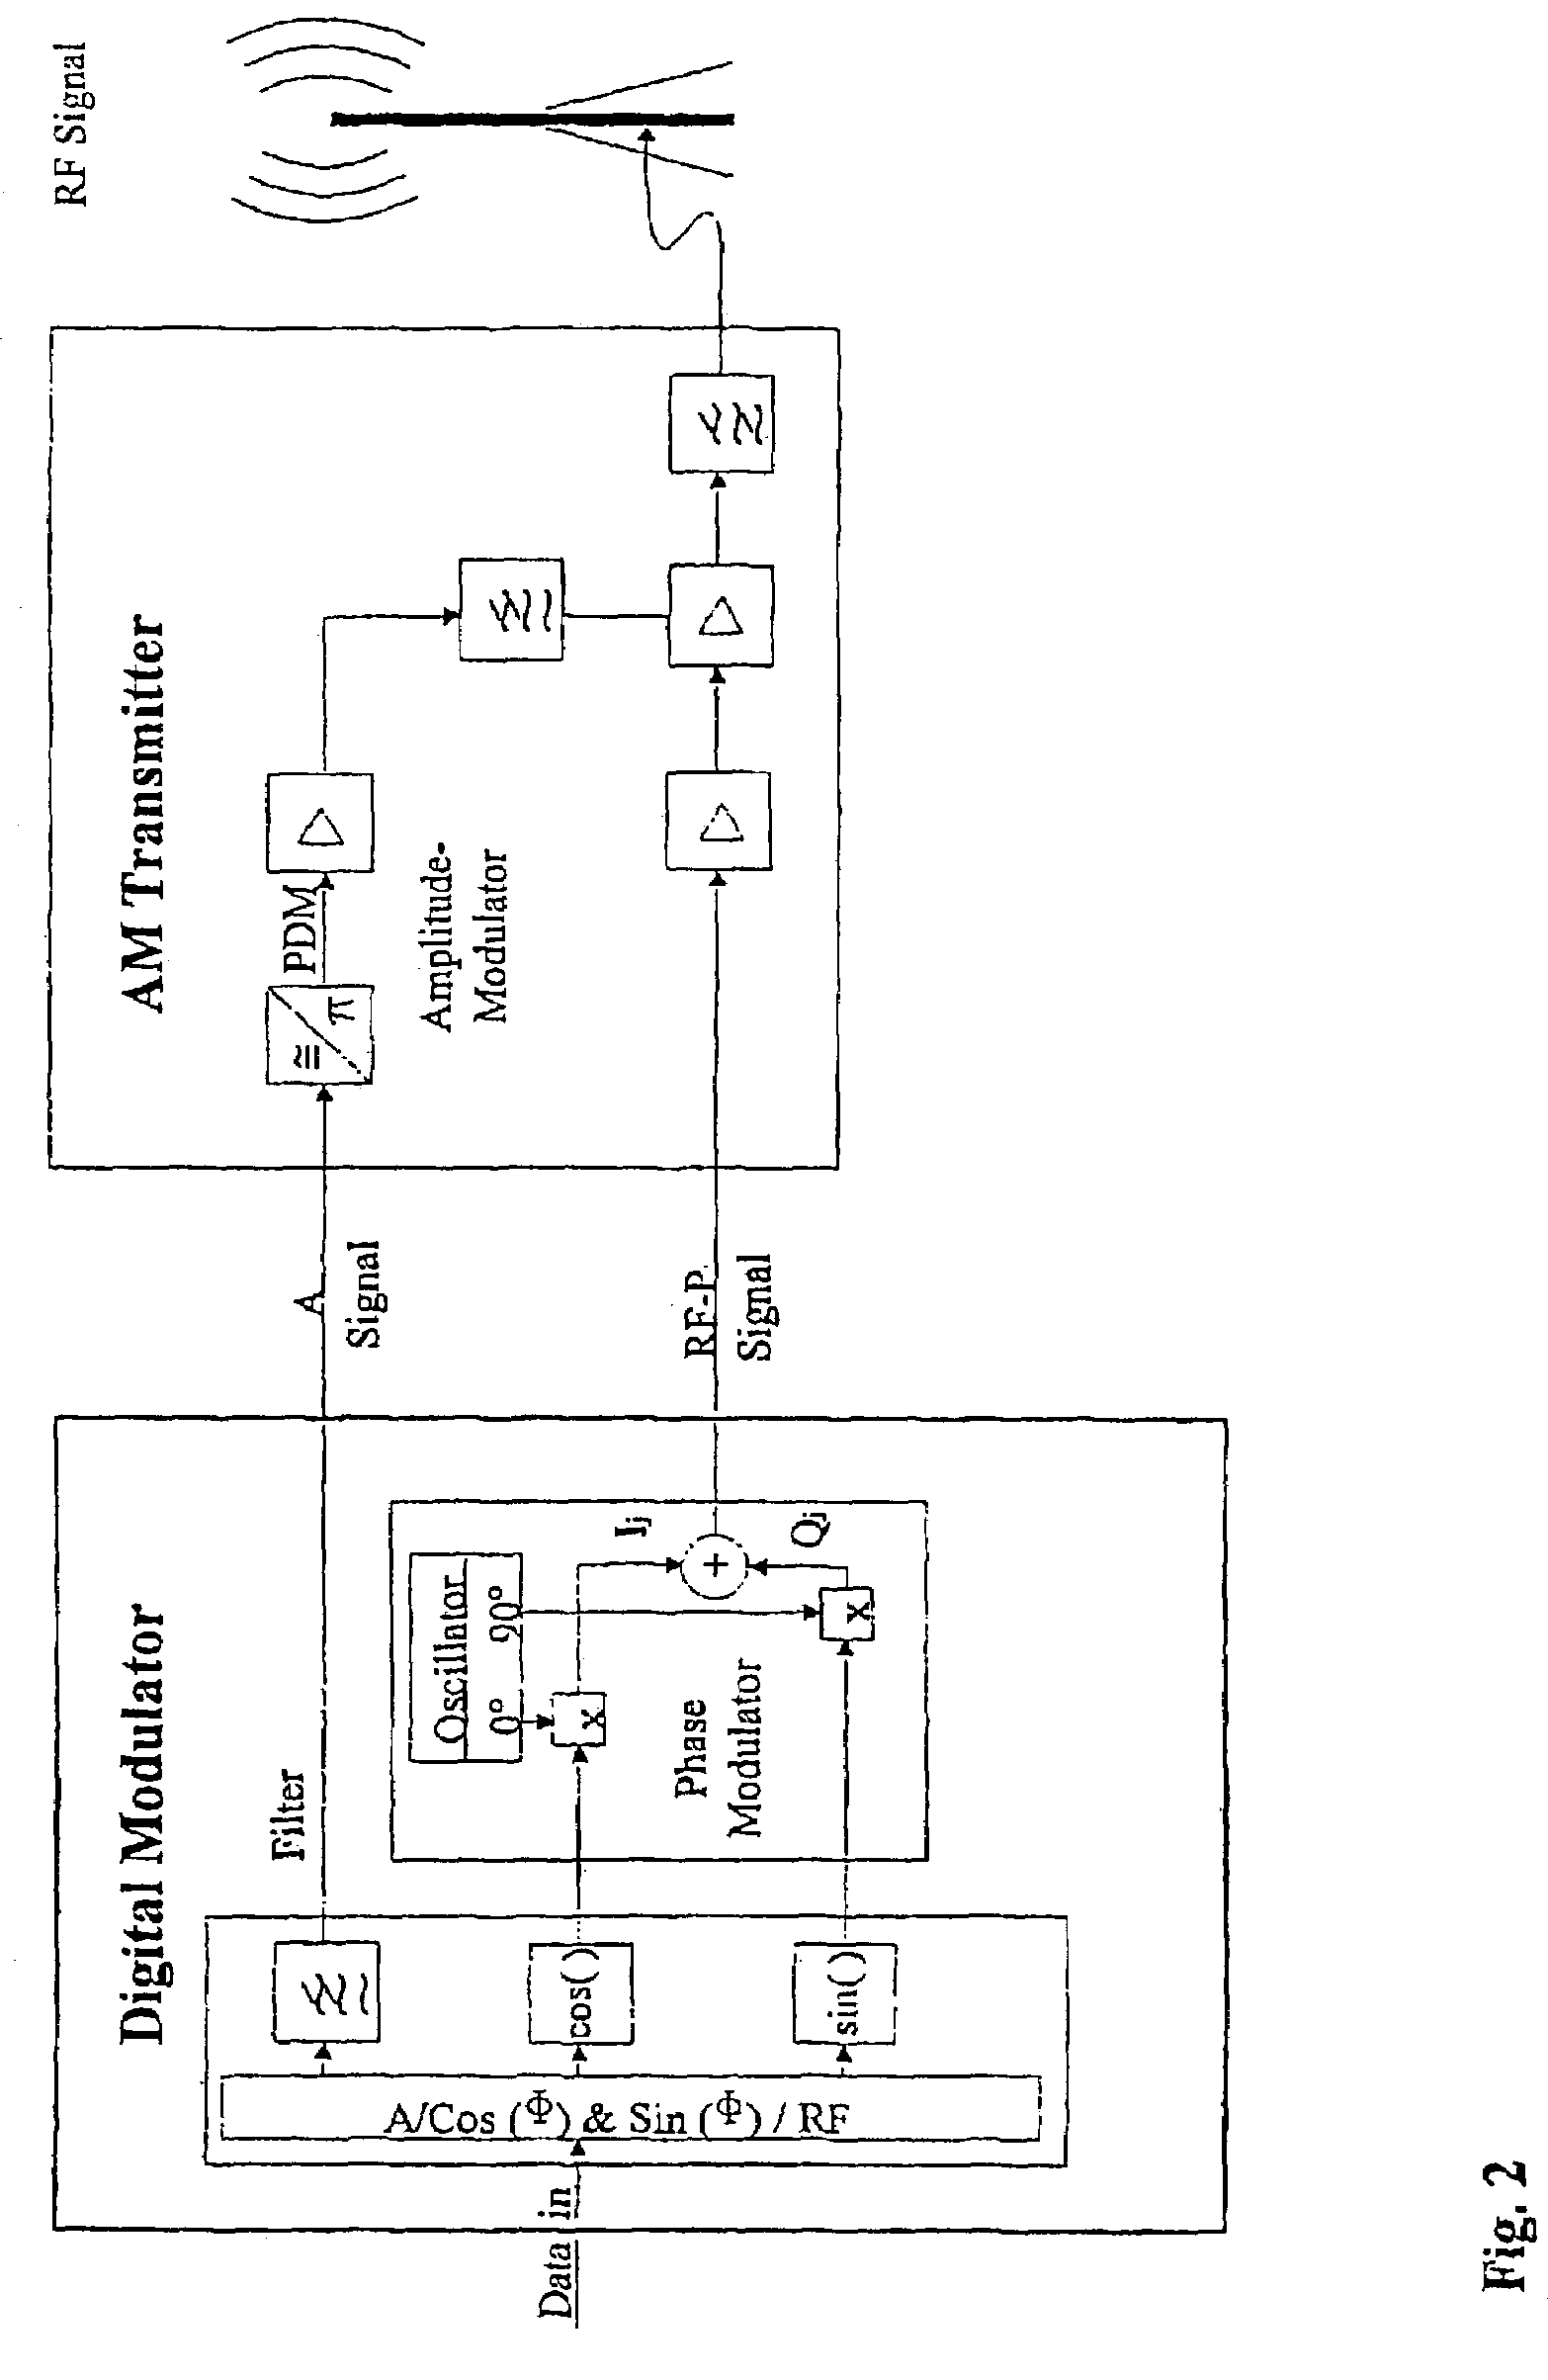 Method for reducing the out-of-band emission in AM transmitters for digital transmission